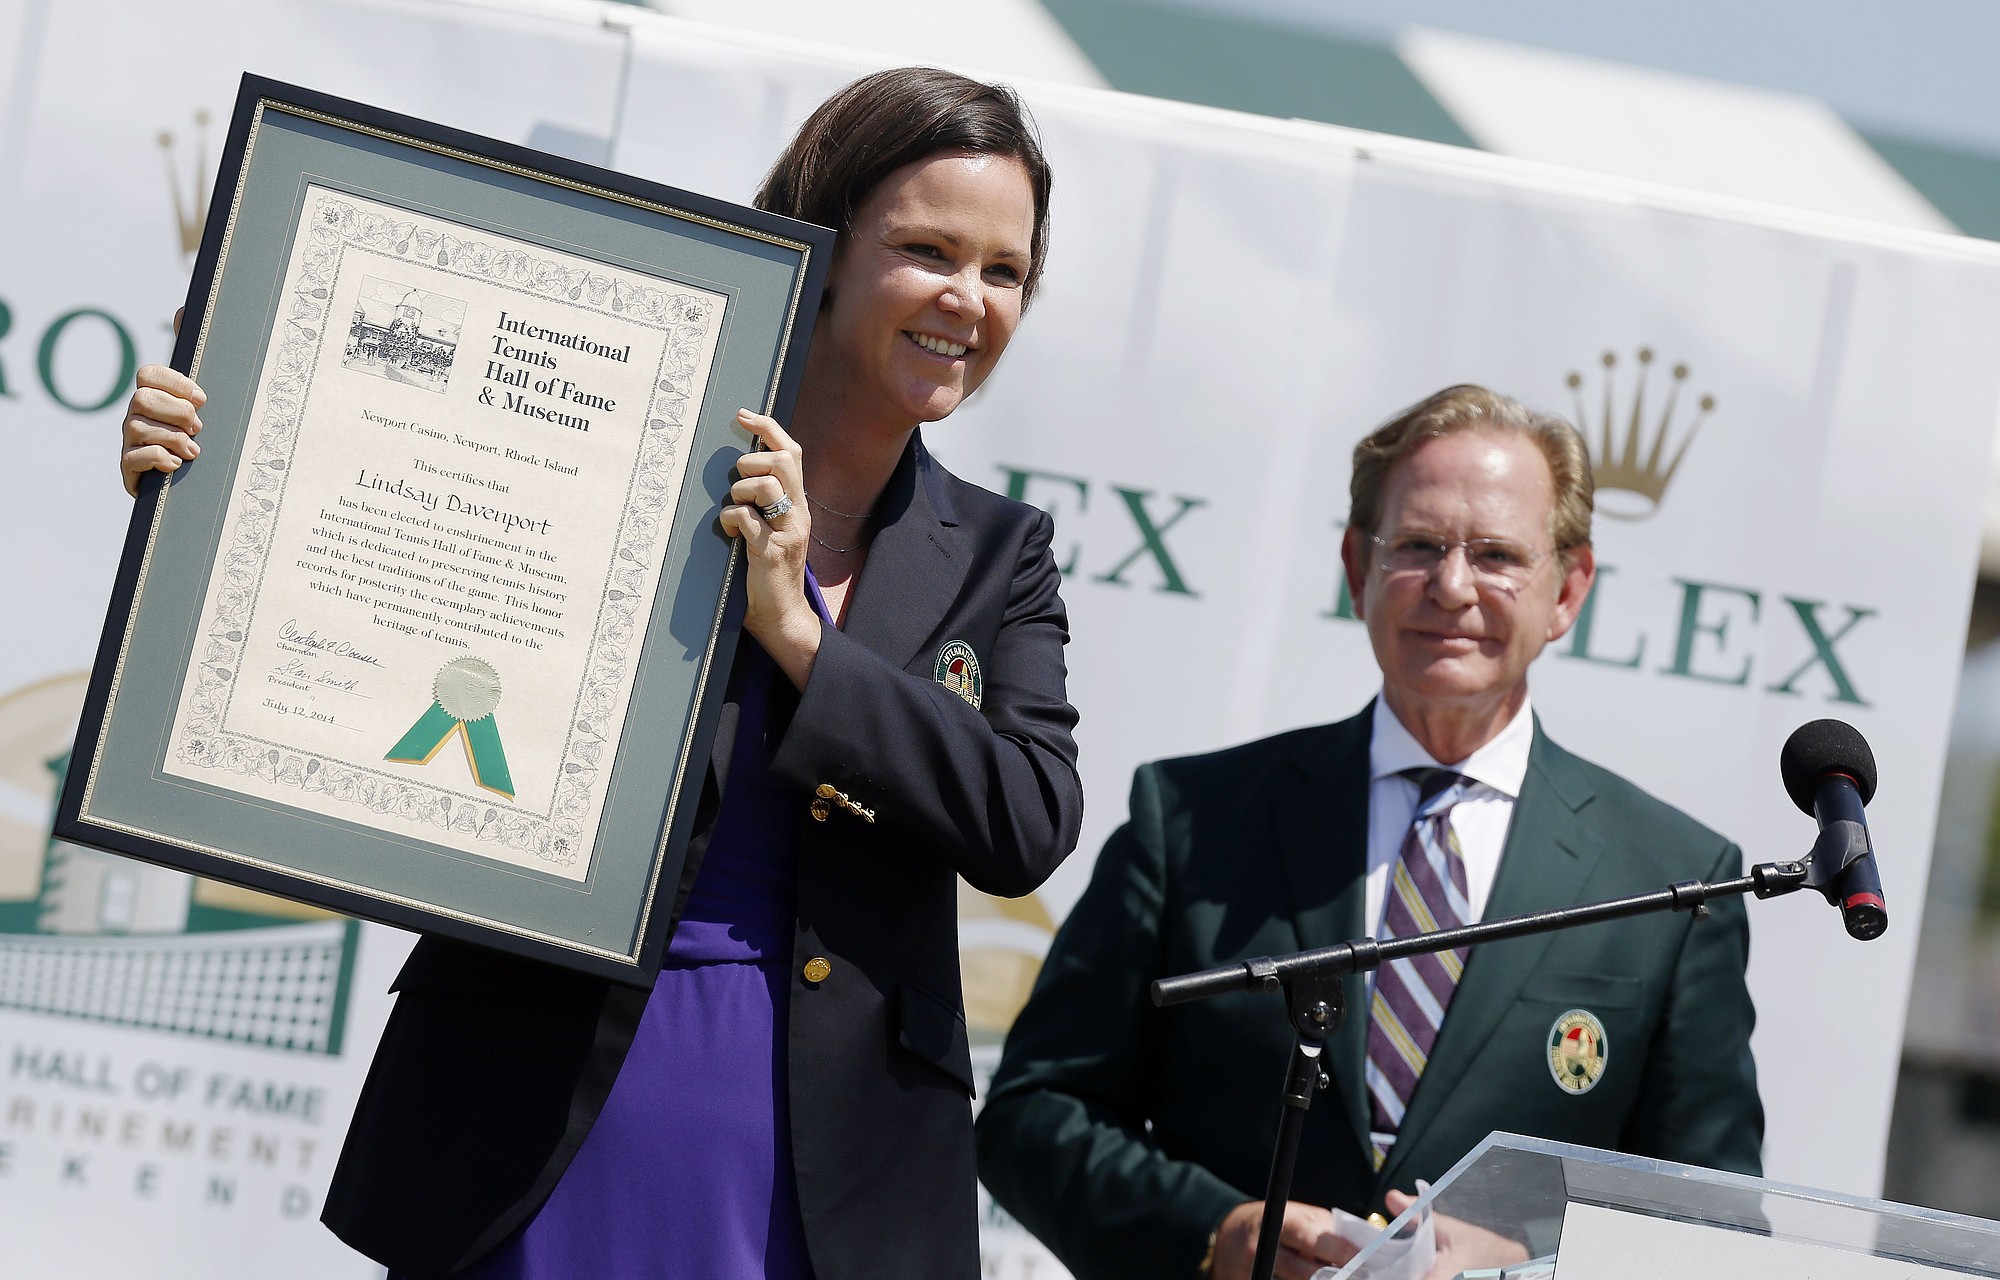 Lindsay Davenport holds her plaque as Christopher Clouser looks on during the induction ceremony at the International Tennis Hall of Fame in Newport, R.I., Saturday, July 12, 2014.